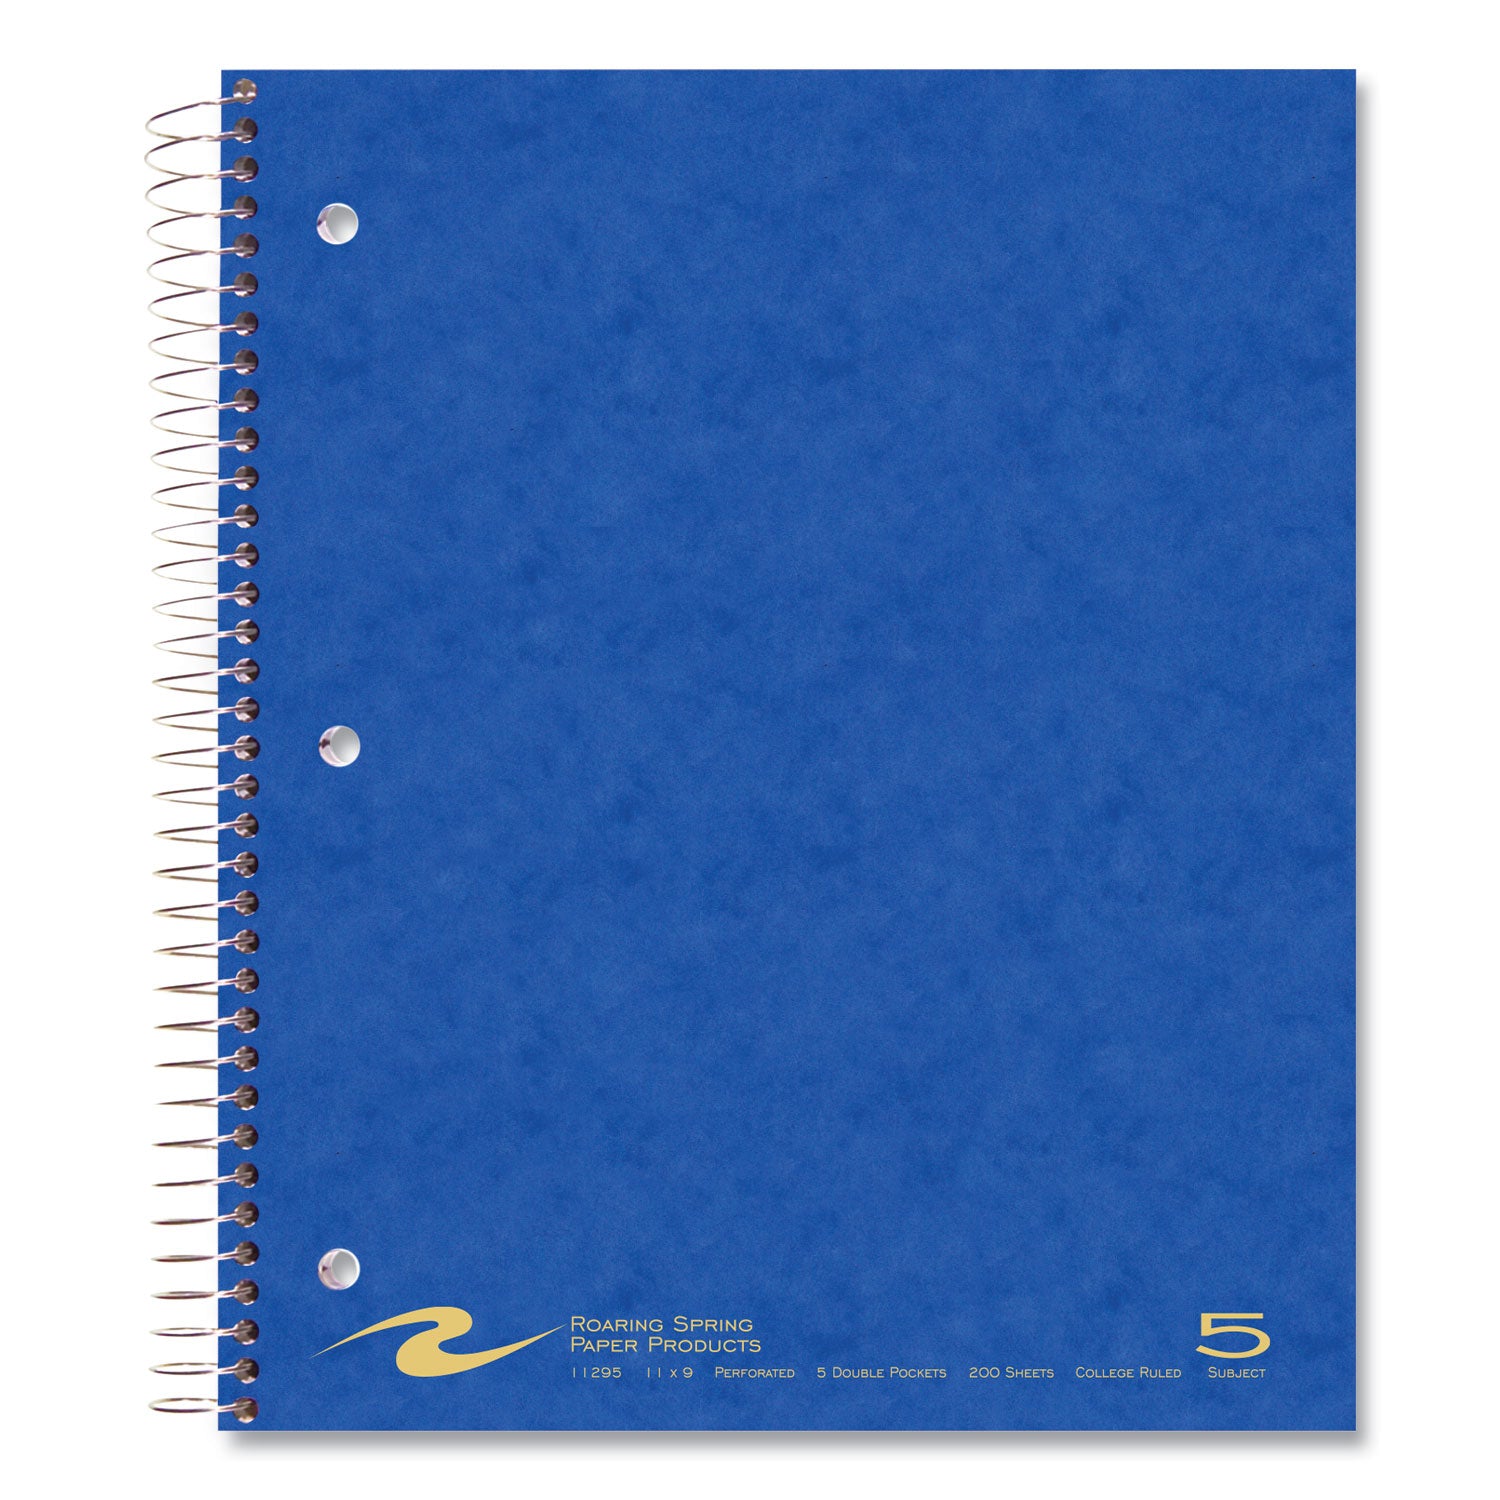 subject-wirebound-notebook-5-subject-medium-college-rule-asst-cover-200-11-x-9-sheets-12-carton-ships-in-4-6-bus-days_roa11295cs - 2